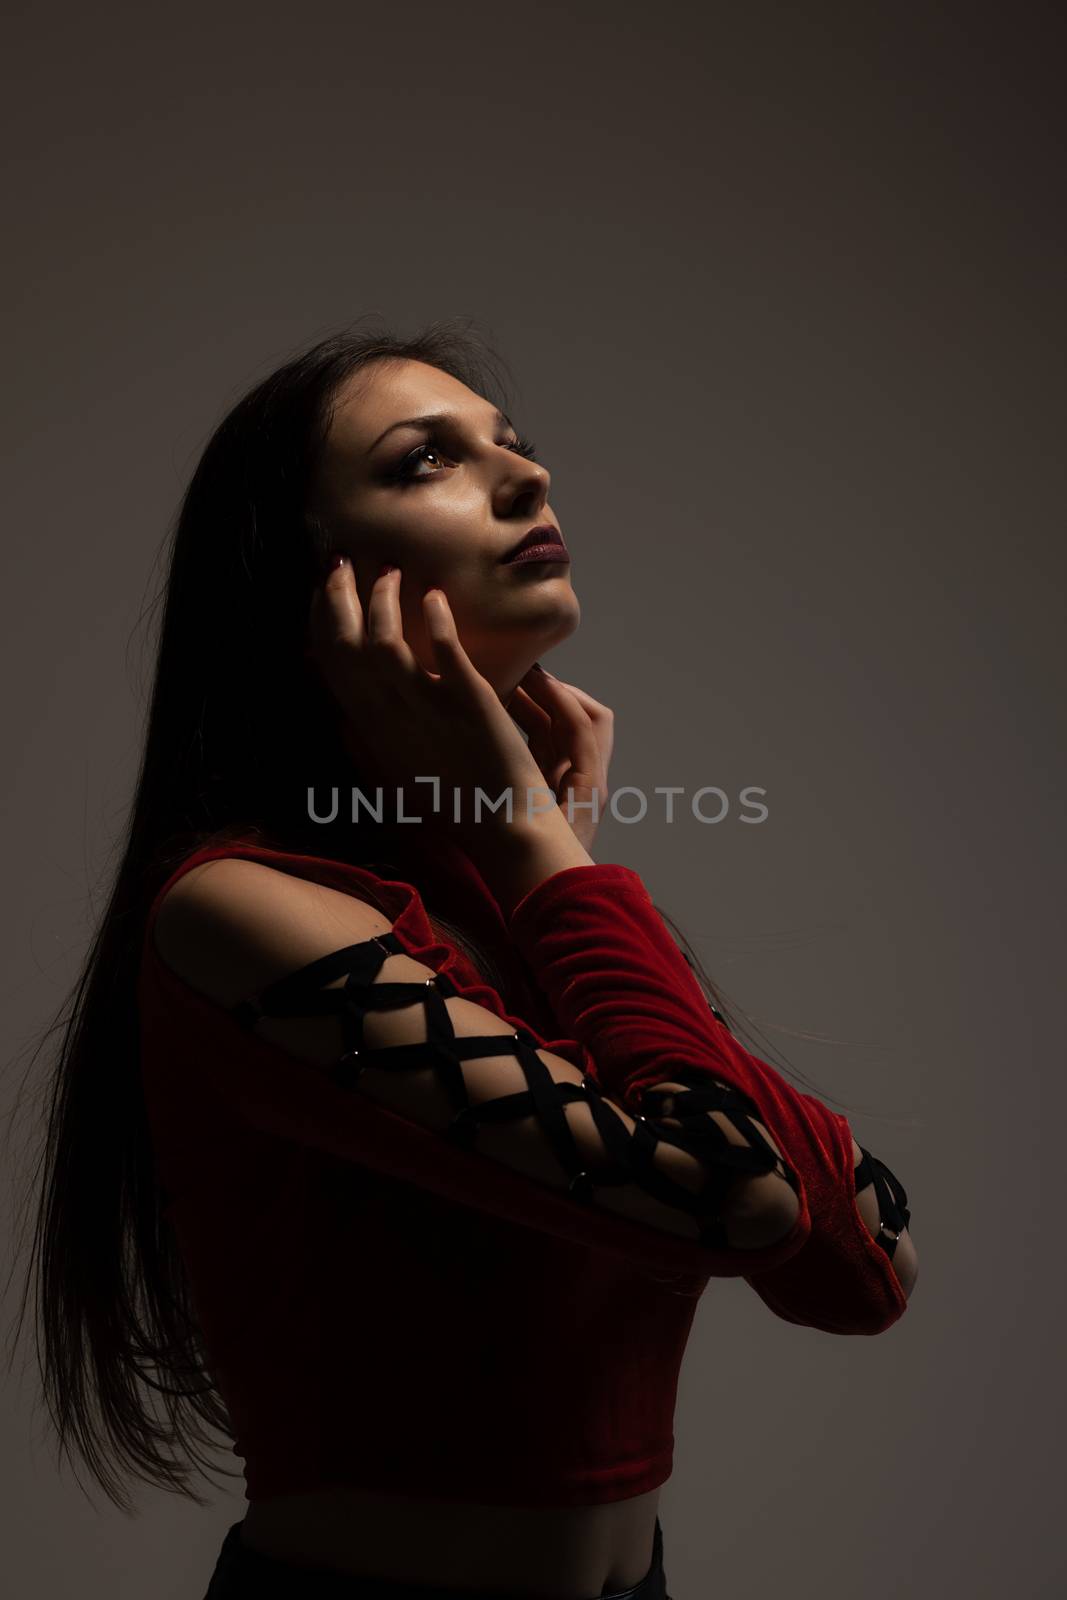 gothic style girl in red shirt, looking up